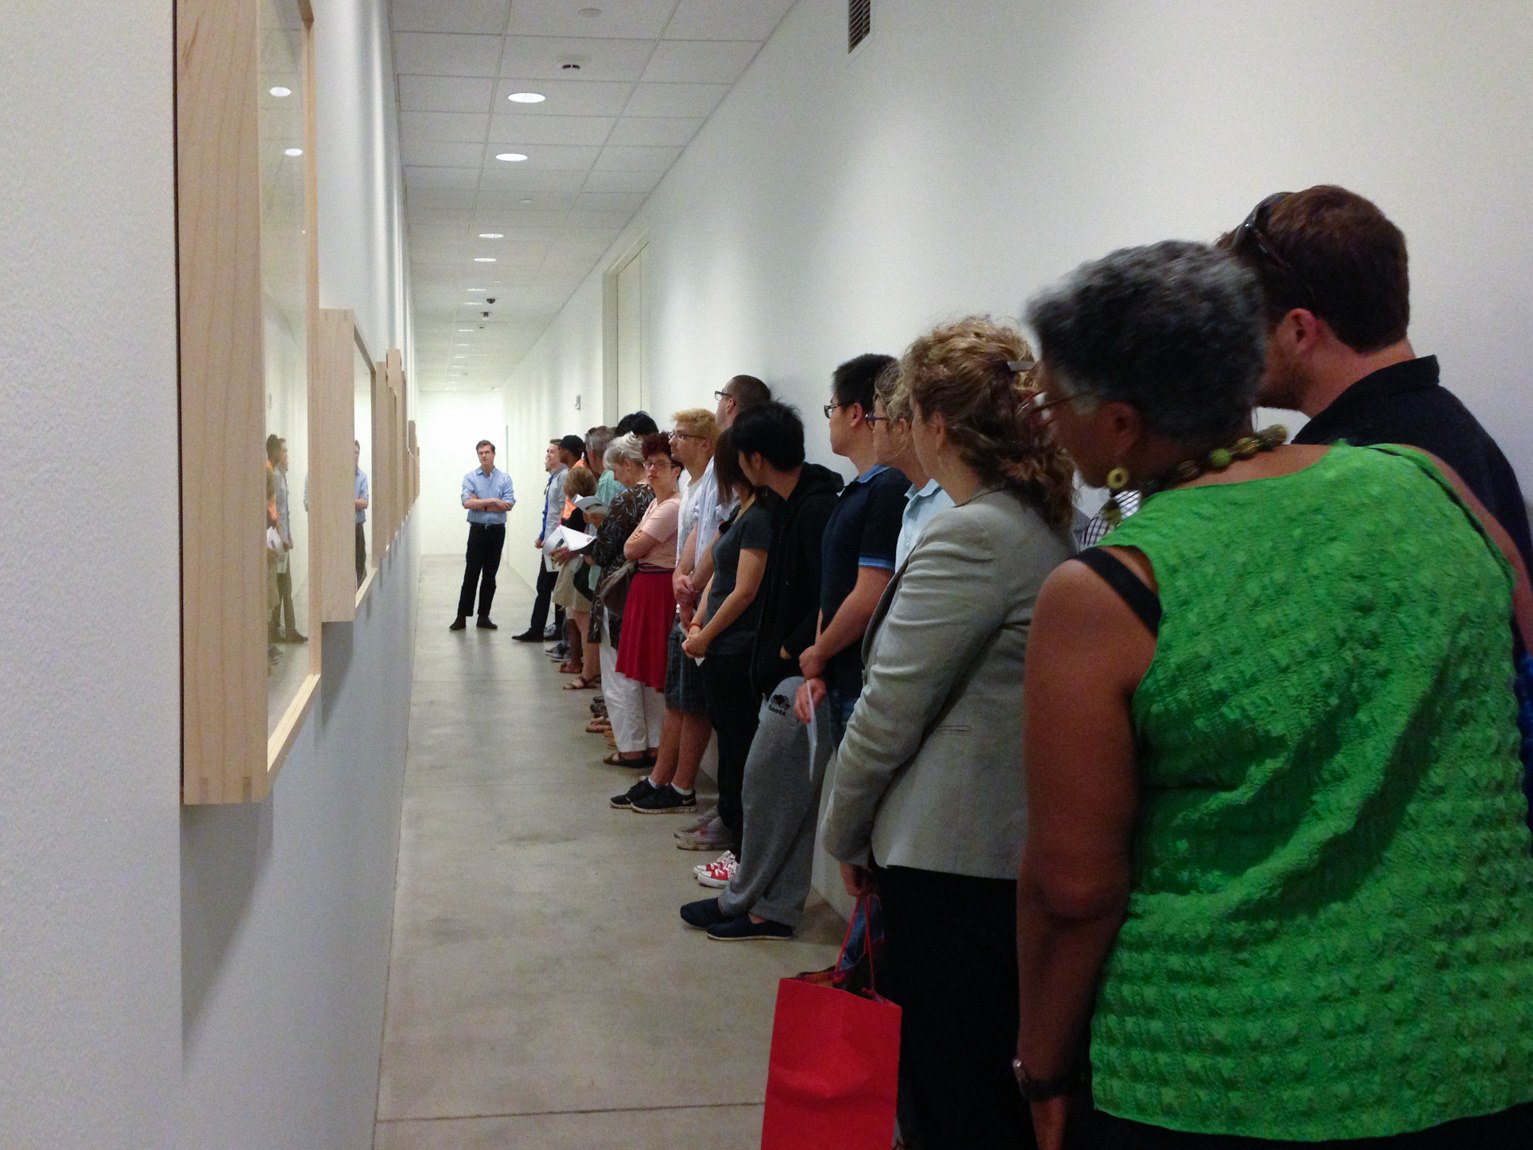 Participants line the lower-level hallway and listen to an individual speak at the far end.